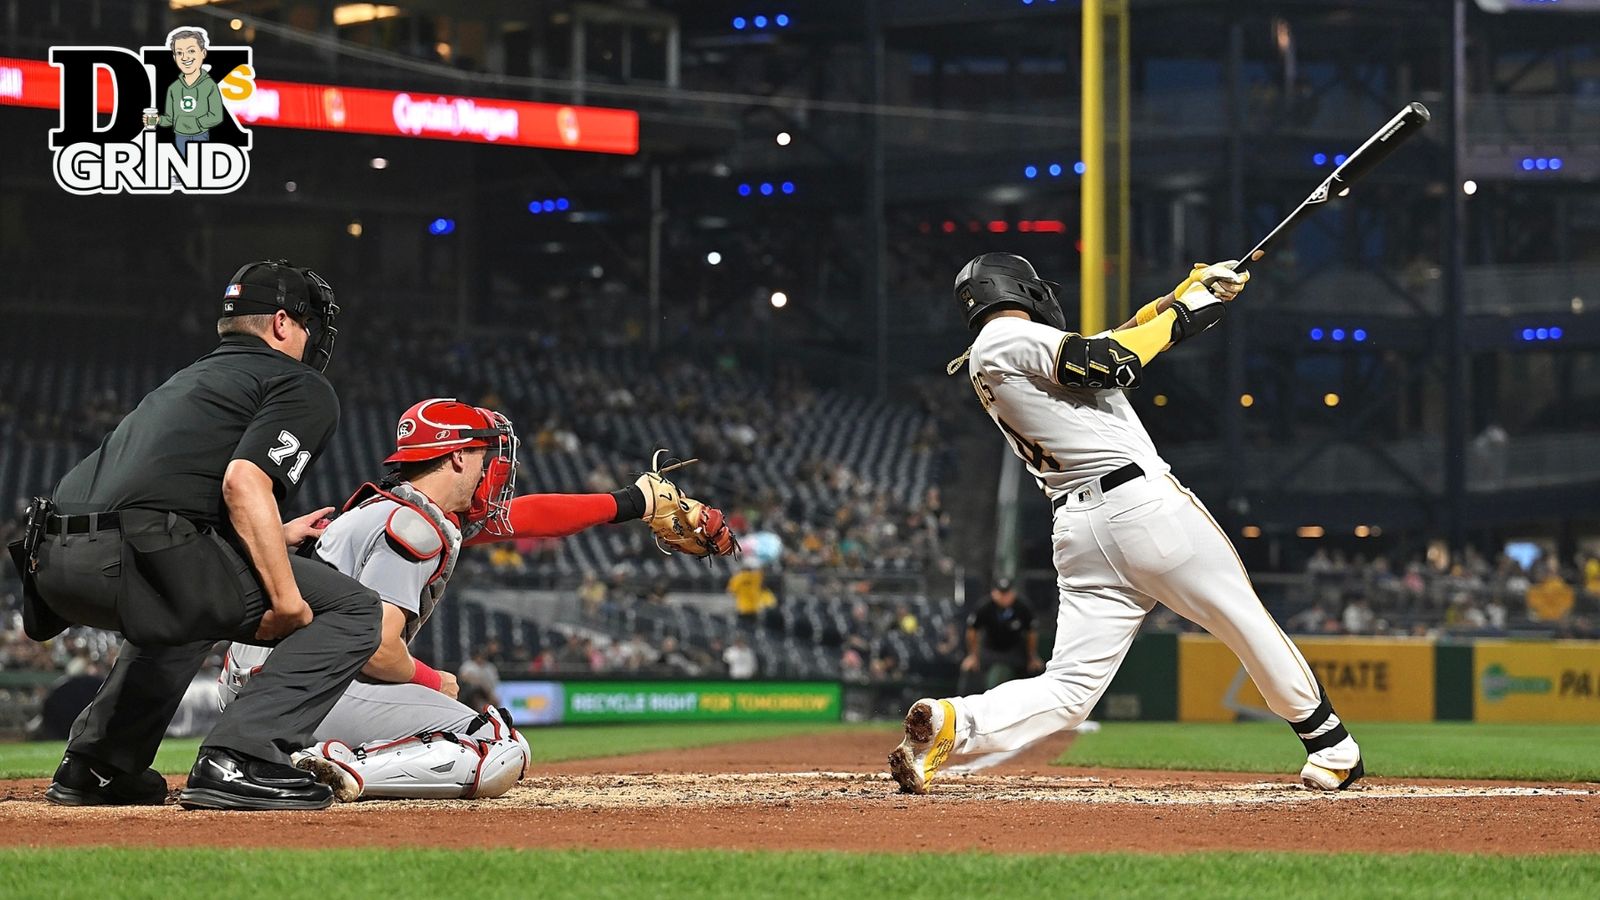 Pirates 6, Red Sox 4: Boston's road woes continue